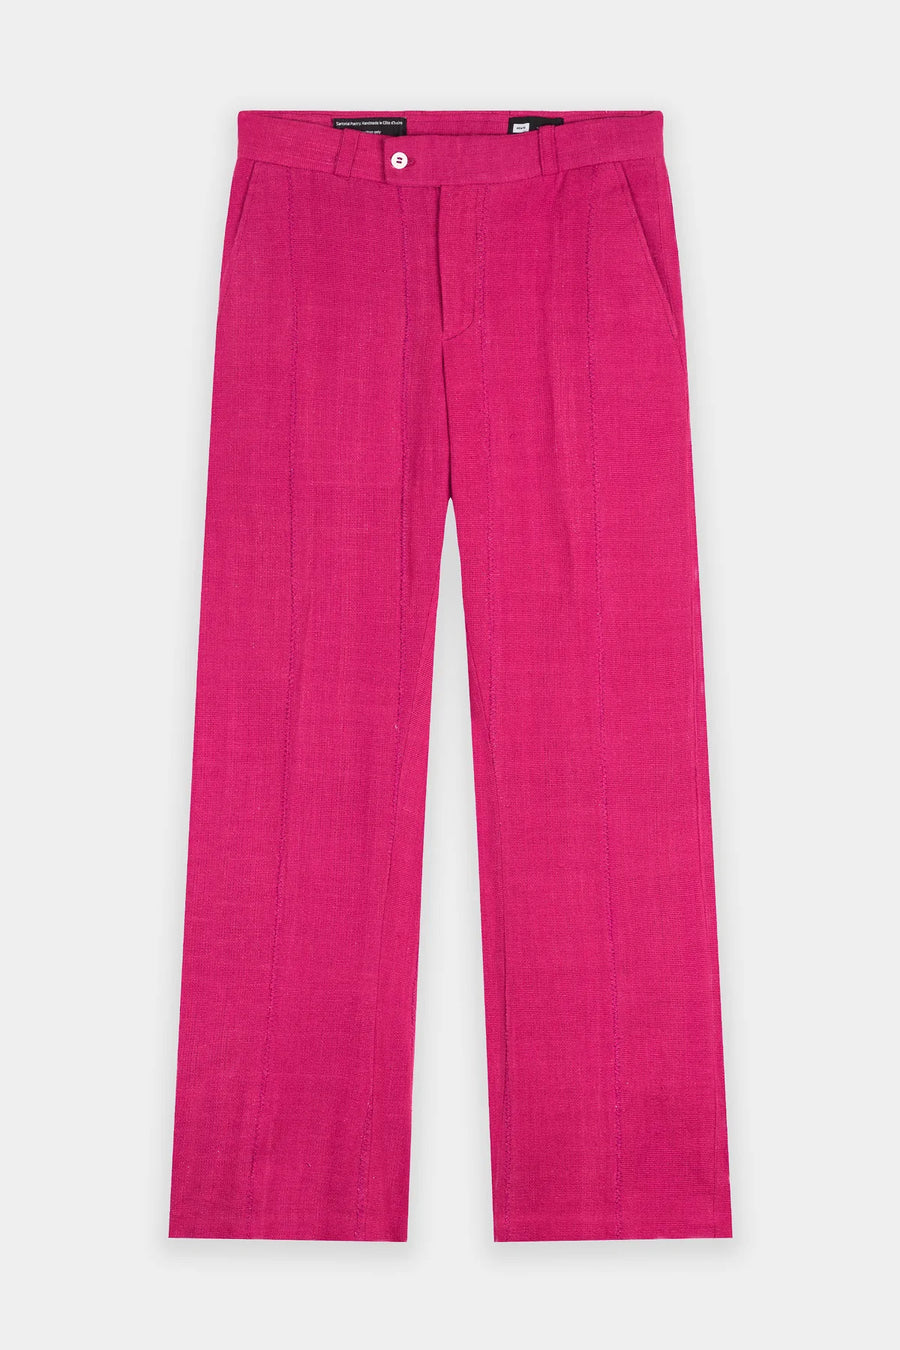 Fela VI Tailor Fitted Straight Cut Pant - Pink